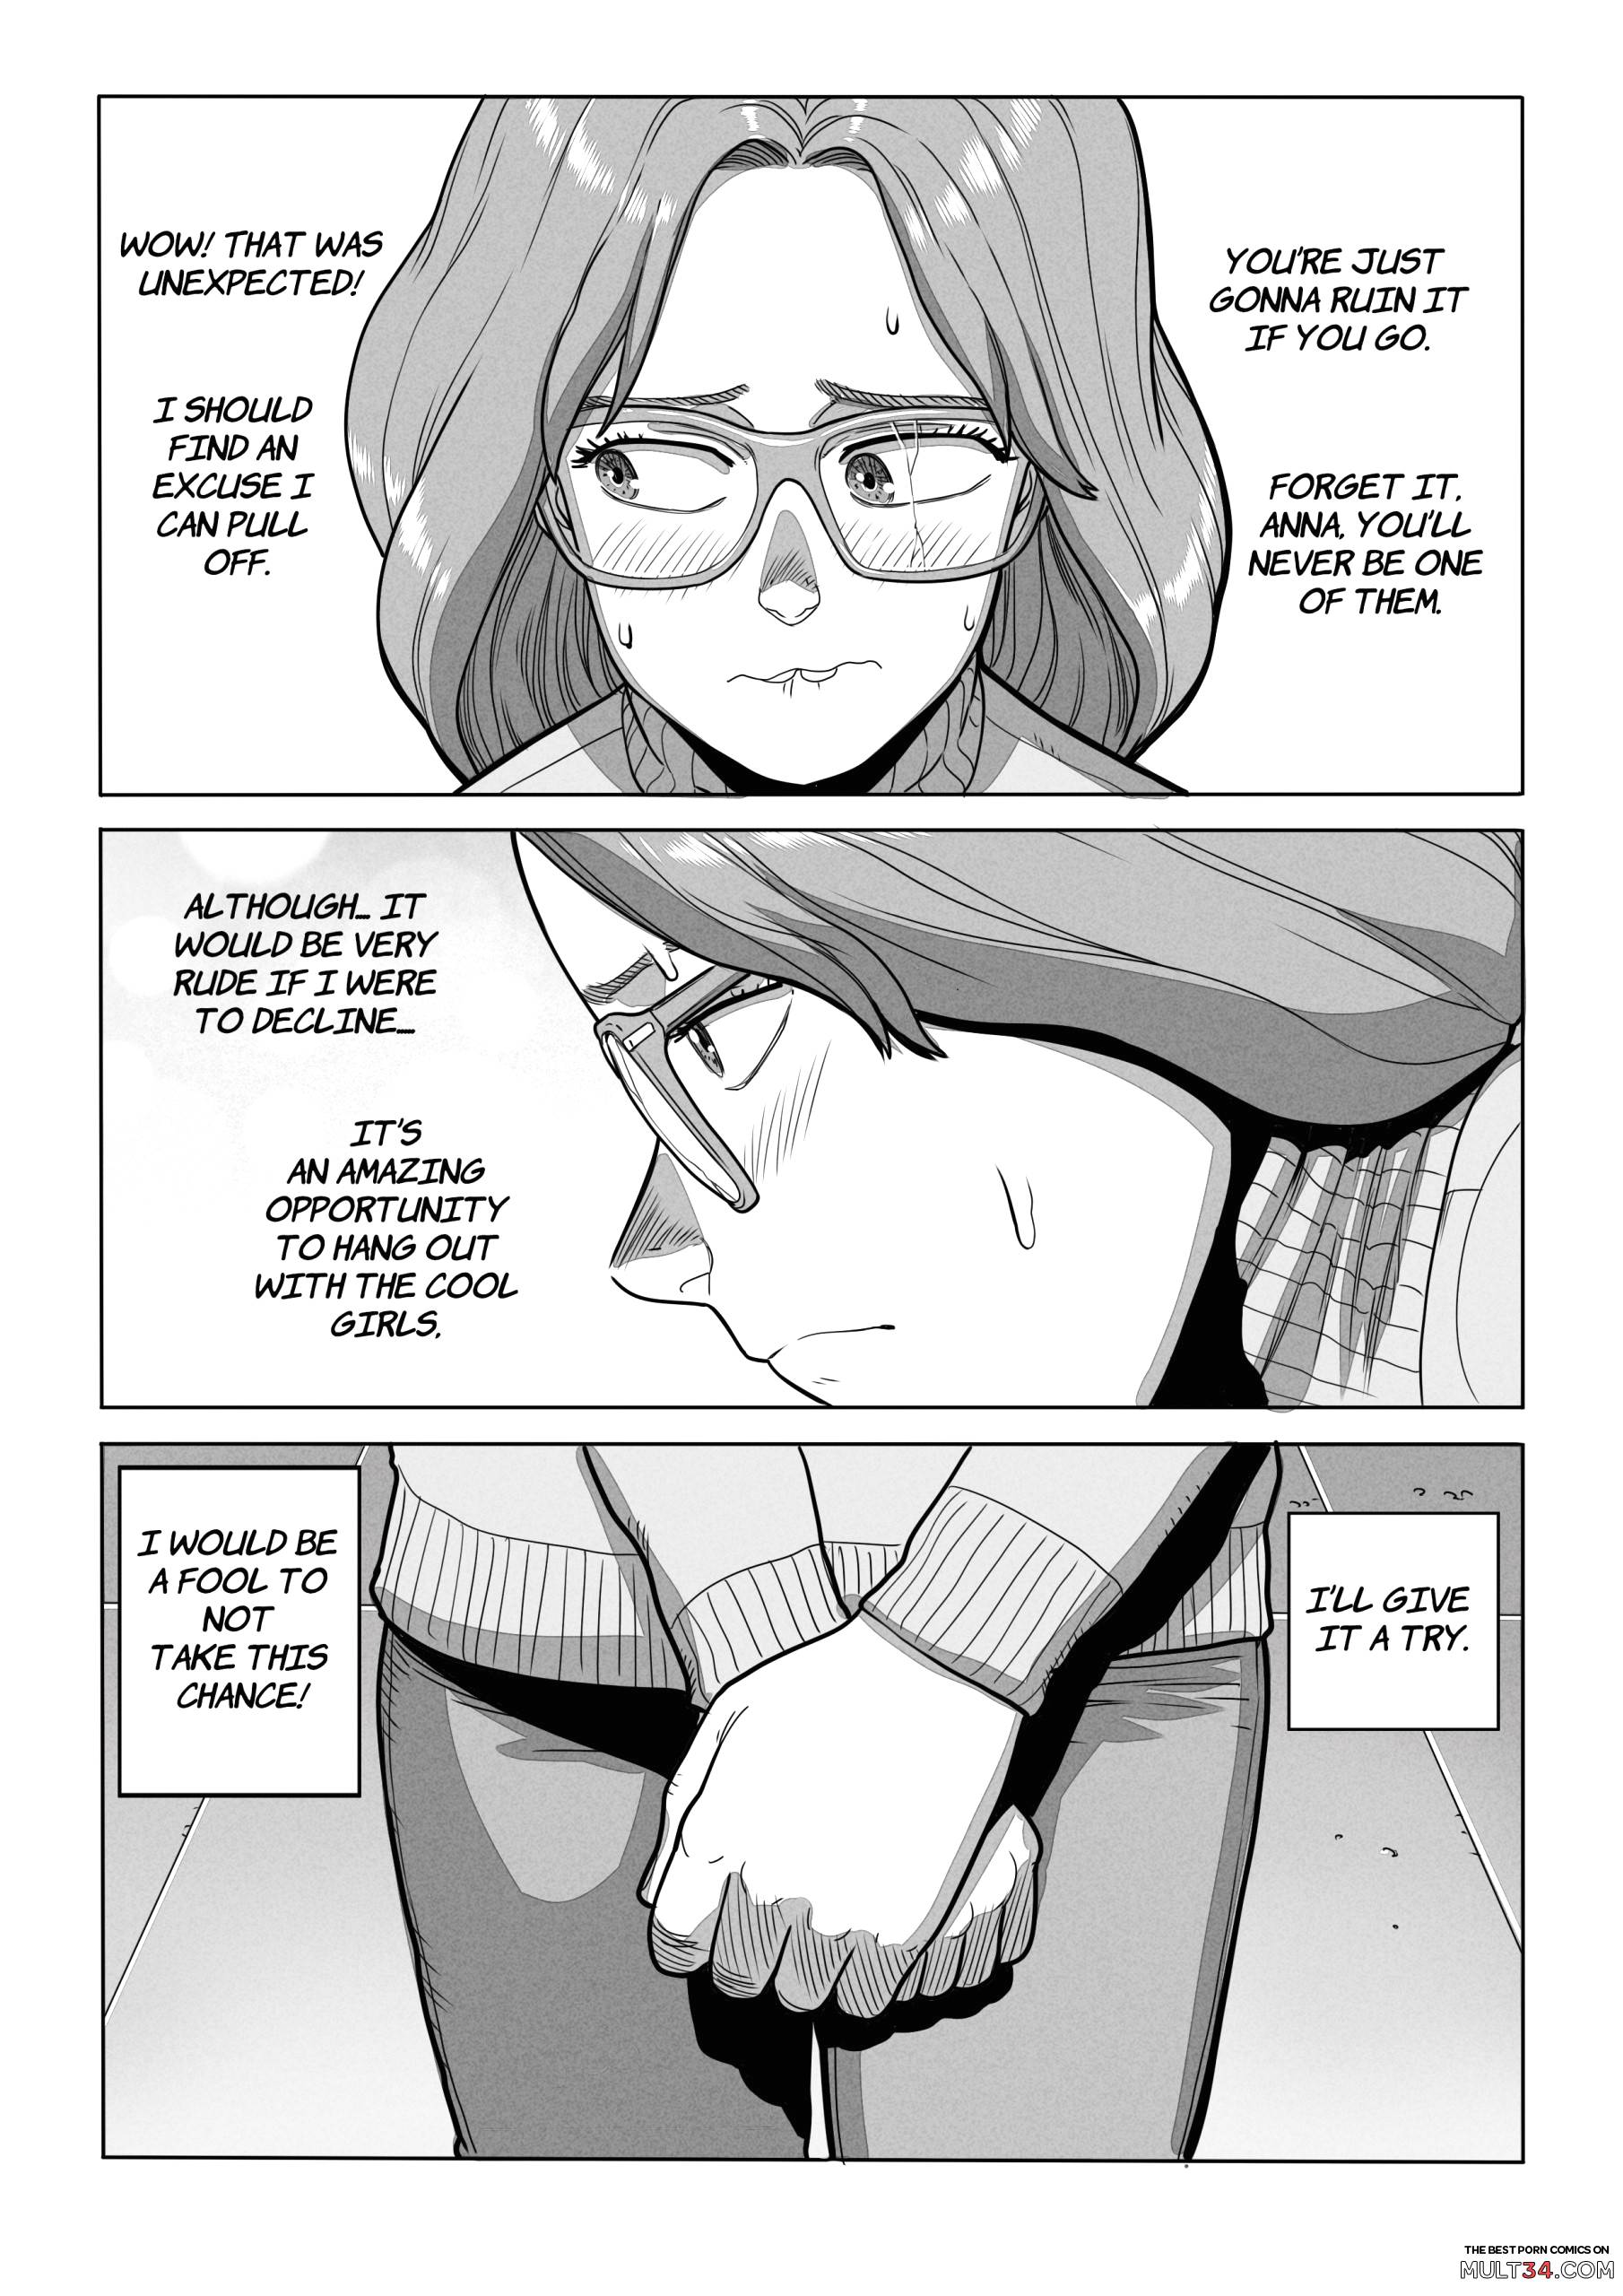 N.I.L.F. - Nerd I'd Like To Fuck page 7